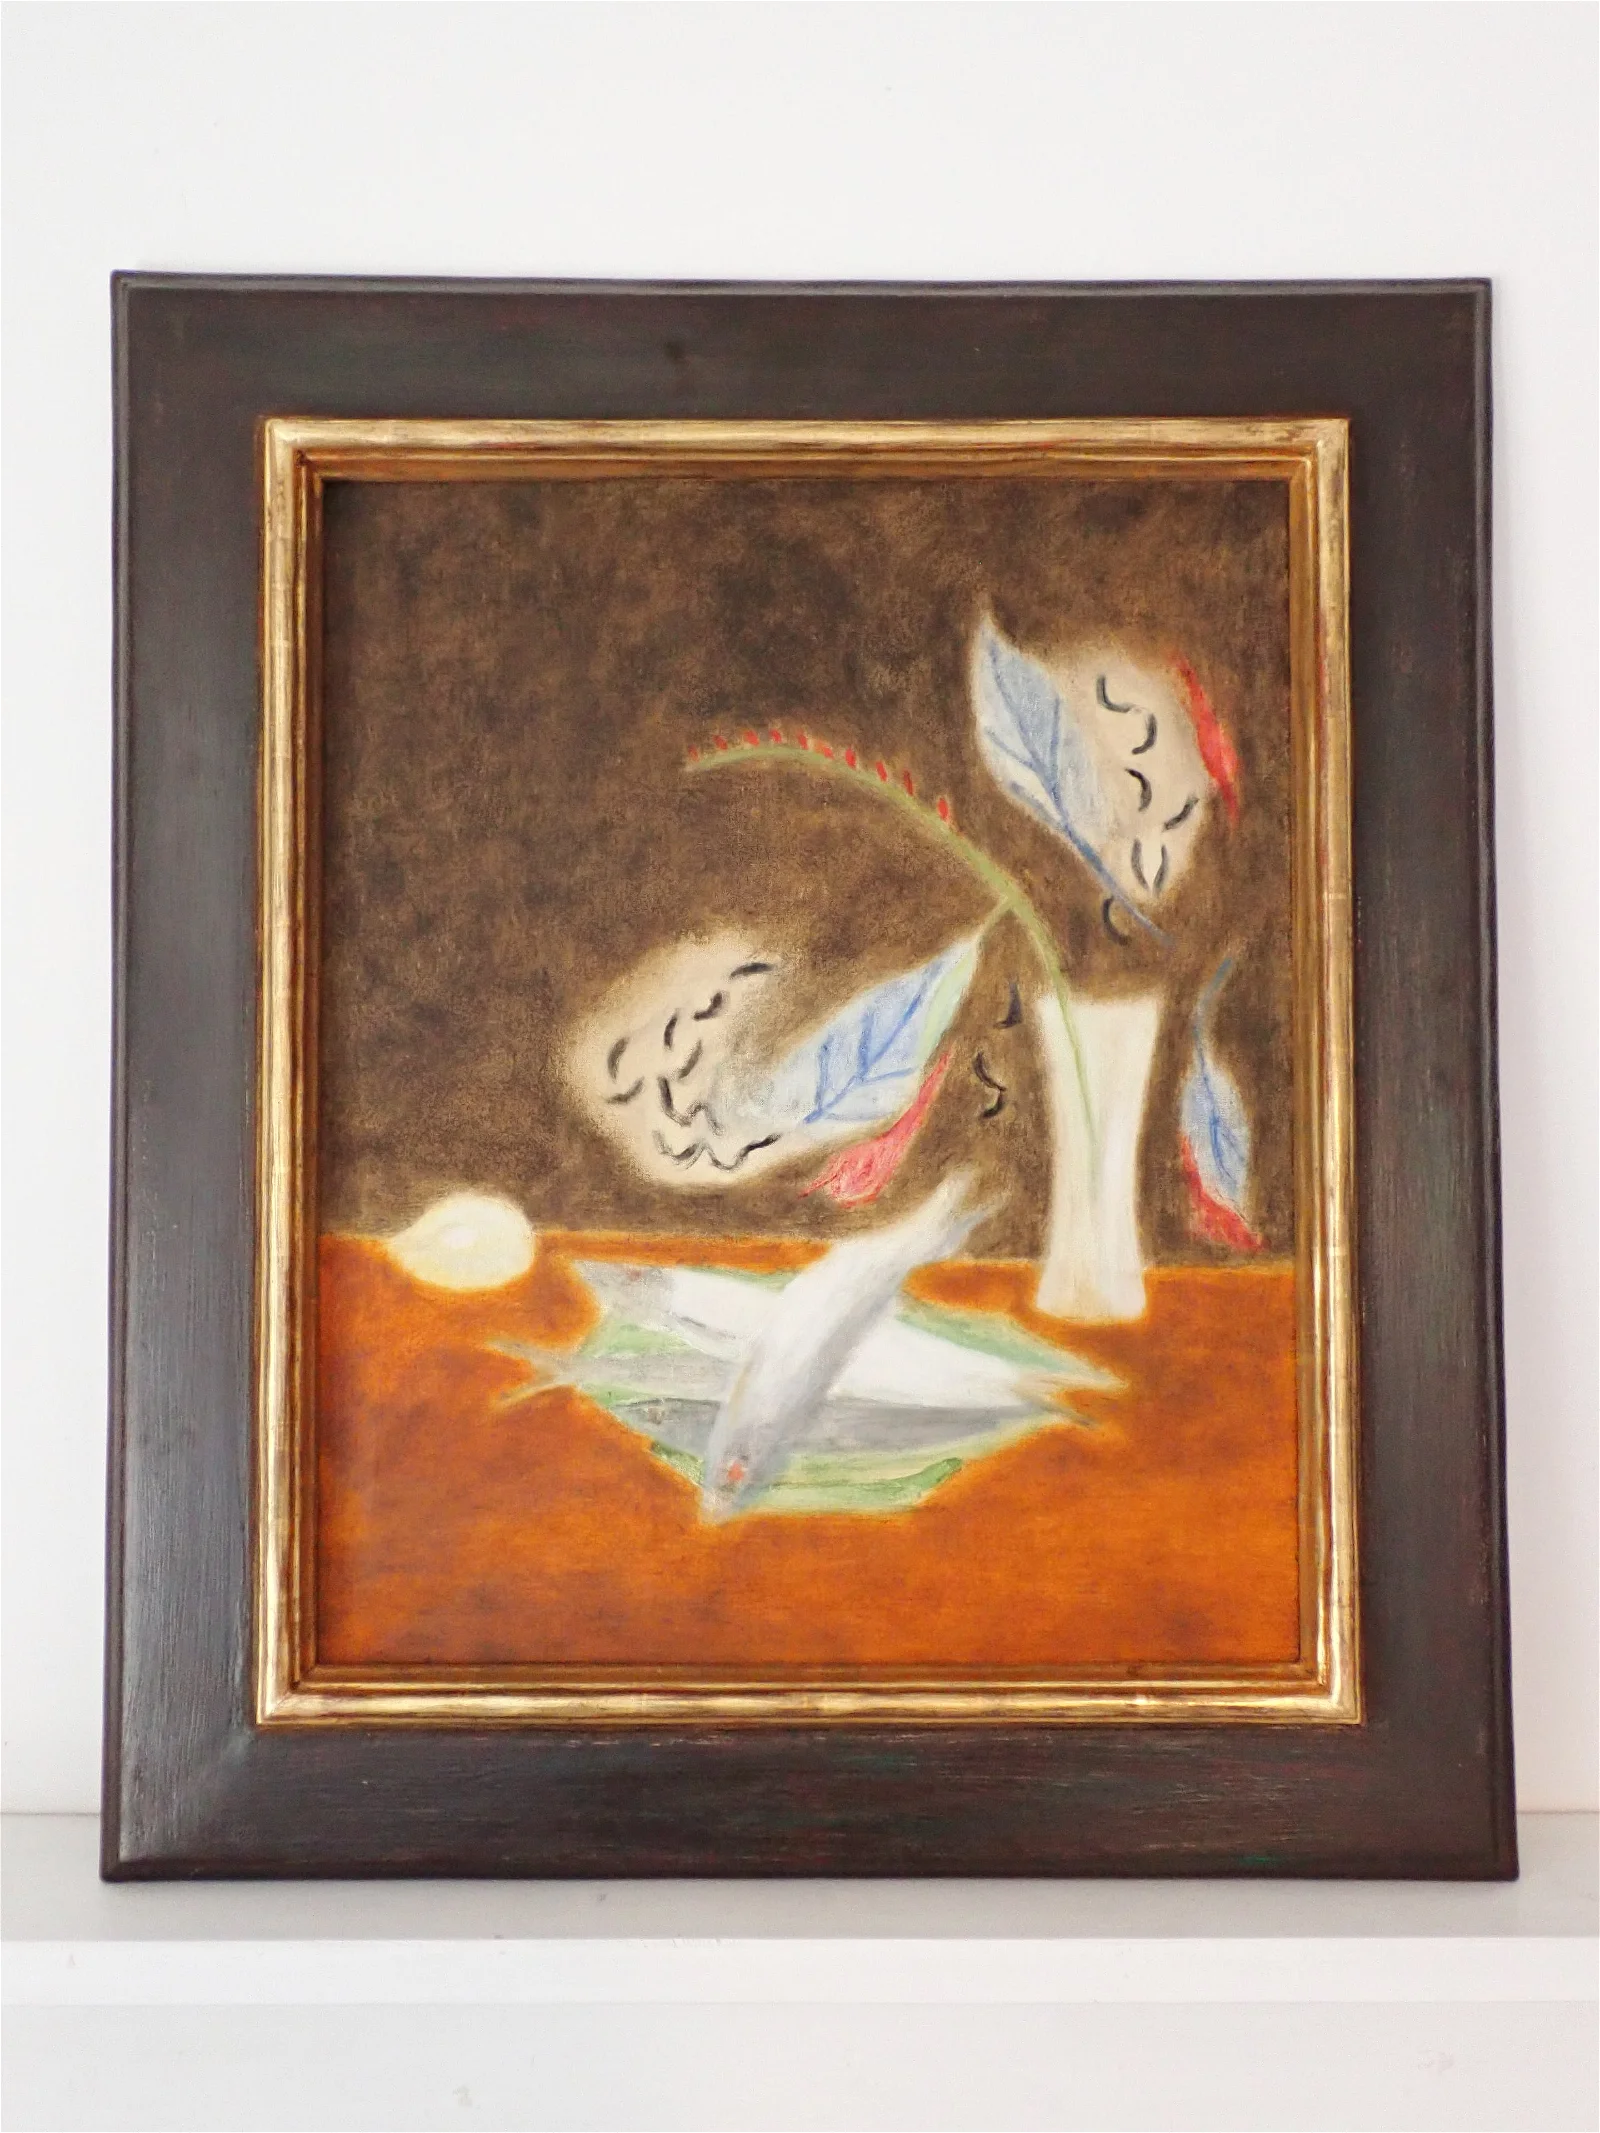 1967 Craigie Aitchinson-Fish Still Life Oil On Canvas - sold at auction Beacon Hill estate - sold at auction for $14,500 from Beacon Hill estate